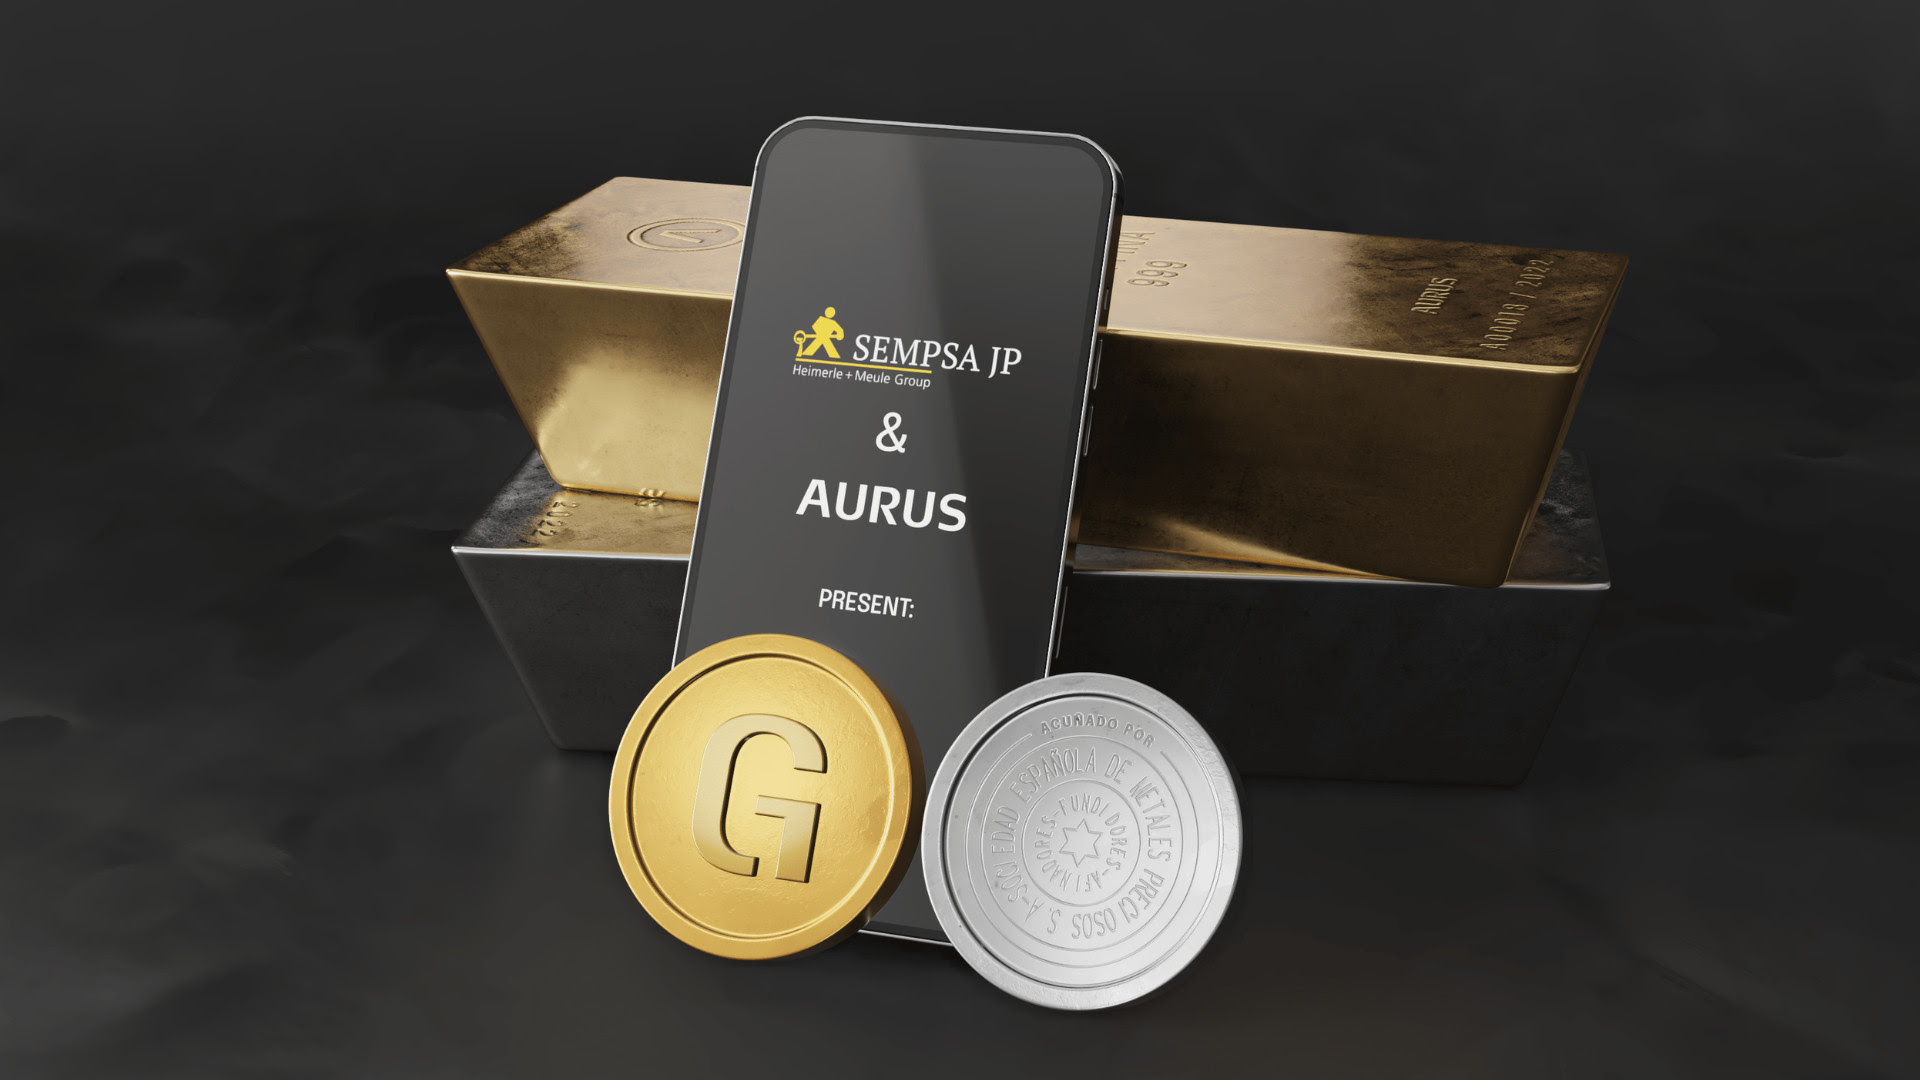 SEMPSA JP Partners With Aurus to Offer Digital Tokens Backed by Gold and Silver